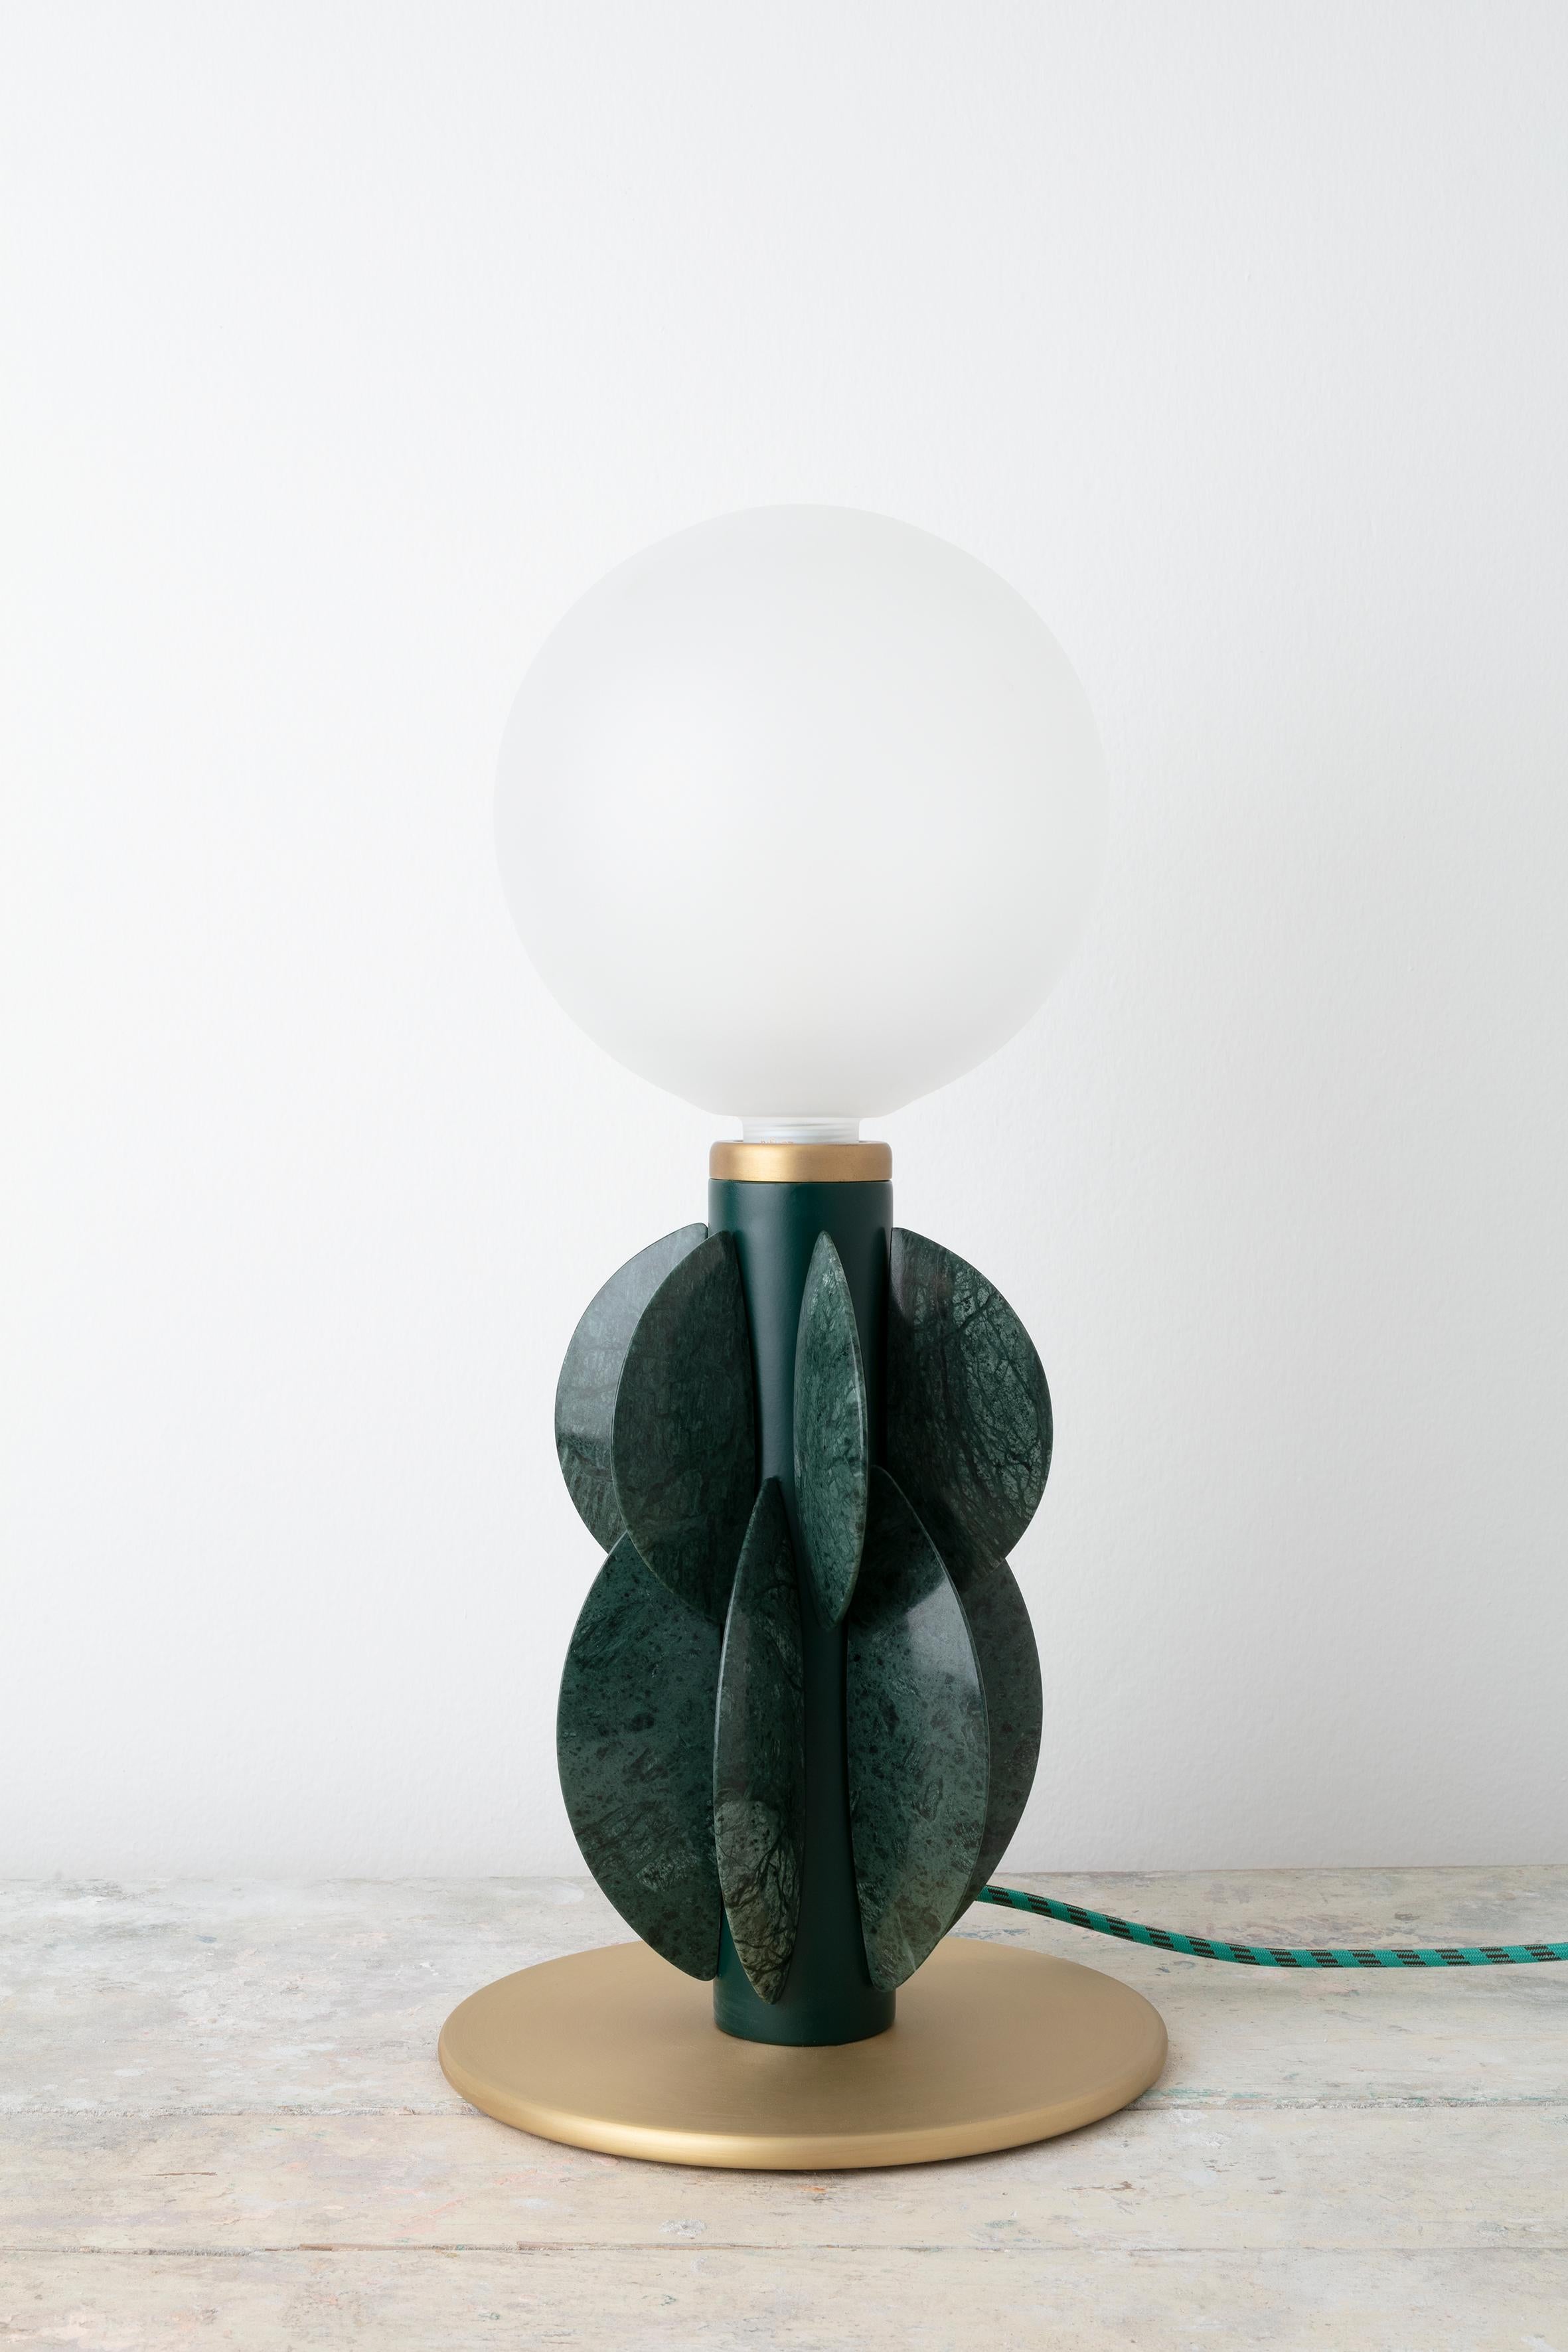 Monarch table lamp with glass dome - Carla Baz
Dimensions: ø 24 x H 50 cm
Weight: 8.5 kg
Material: Painted metal, Brass, Marble

Monarch lighting series has been developed with the idea of opulence and fine details all the while keeping with